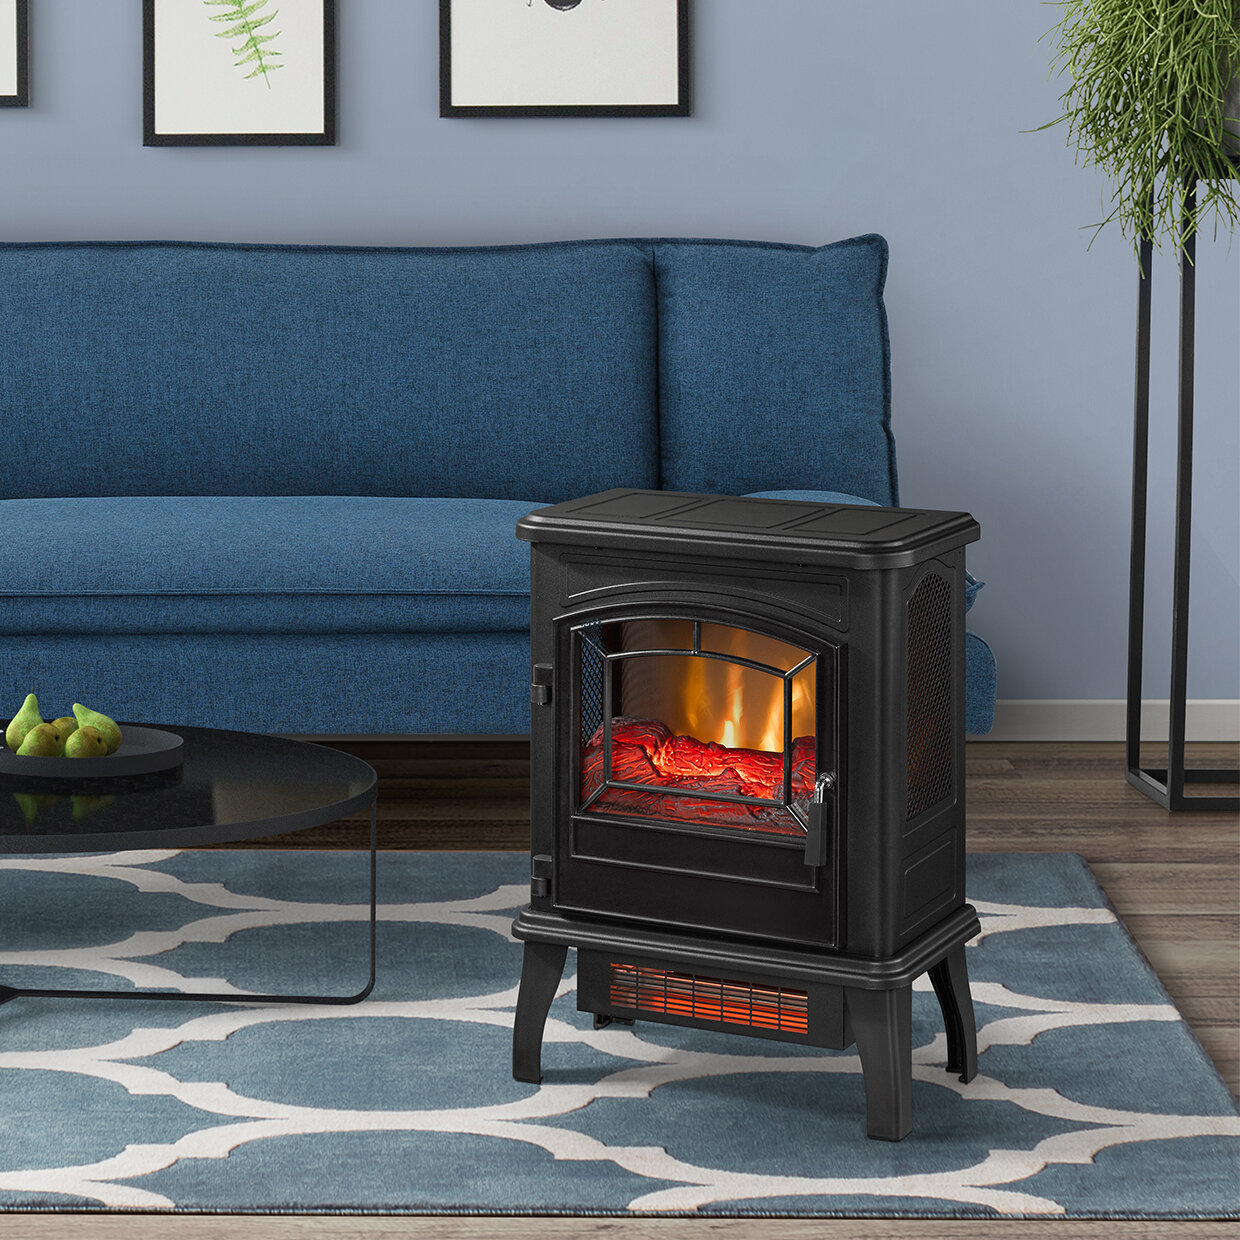 Skraut home Furniture With Electric Fireplace With 5 Levels Of Flame